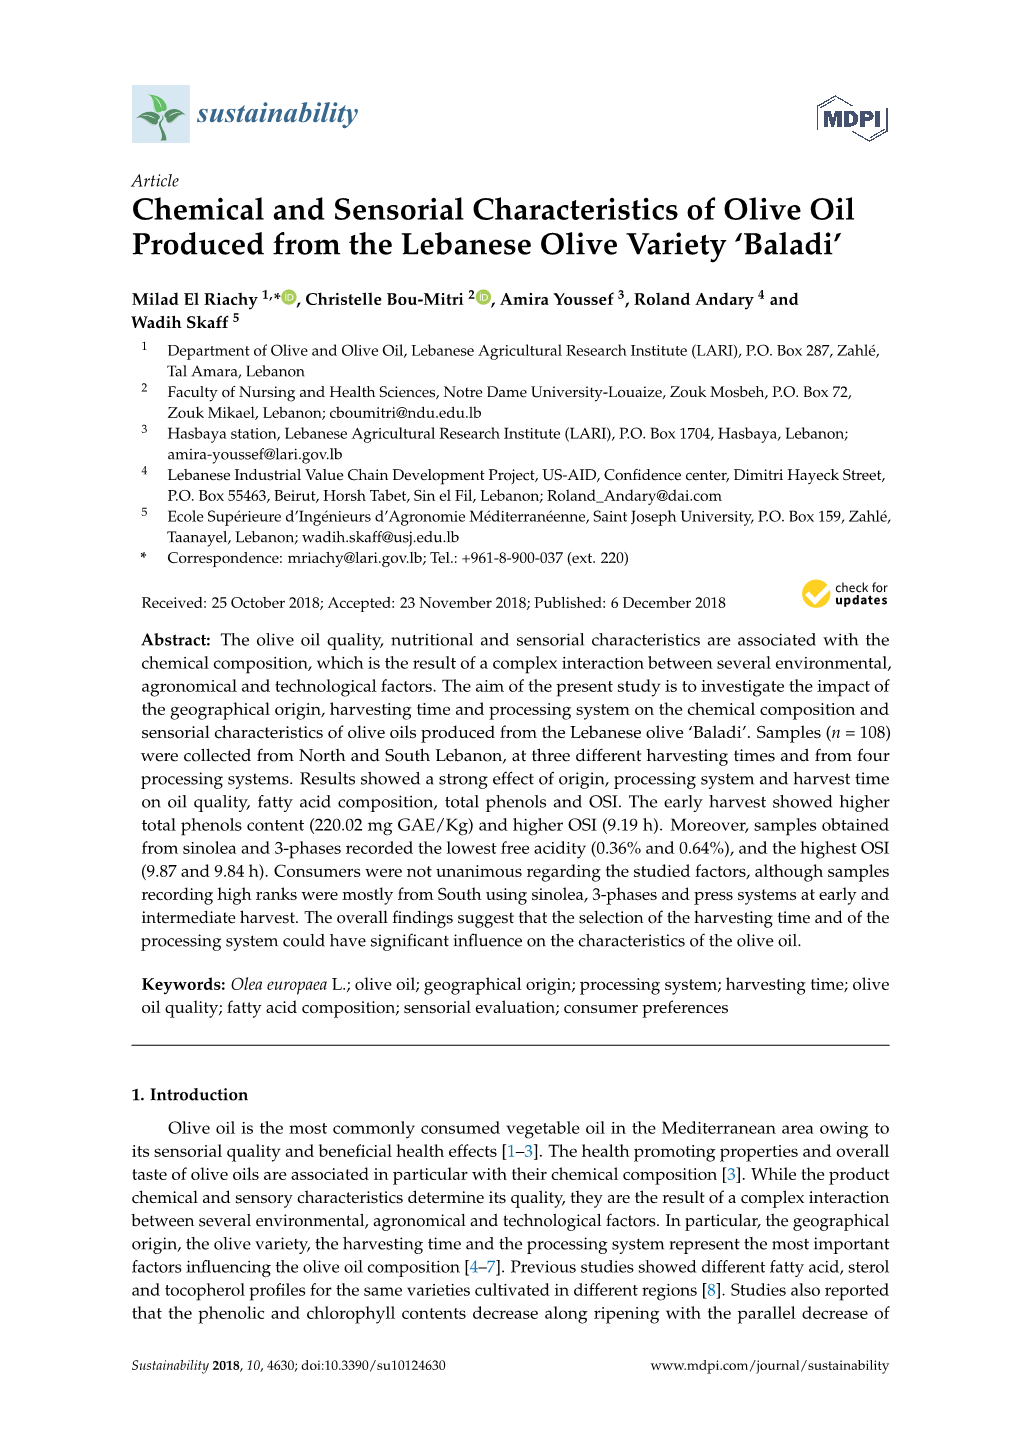 Chemical and Sensorial Characteristics of Olive Oil Produced from the Lebanese Olive Variety ‘Baladi’